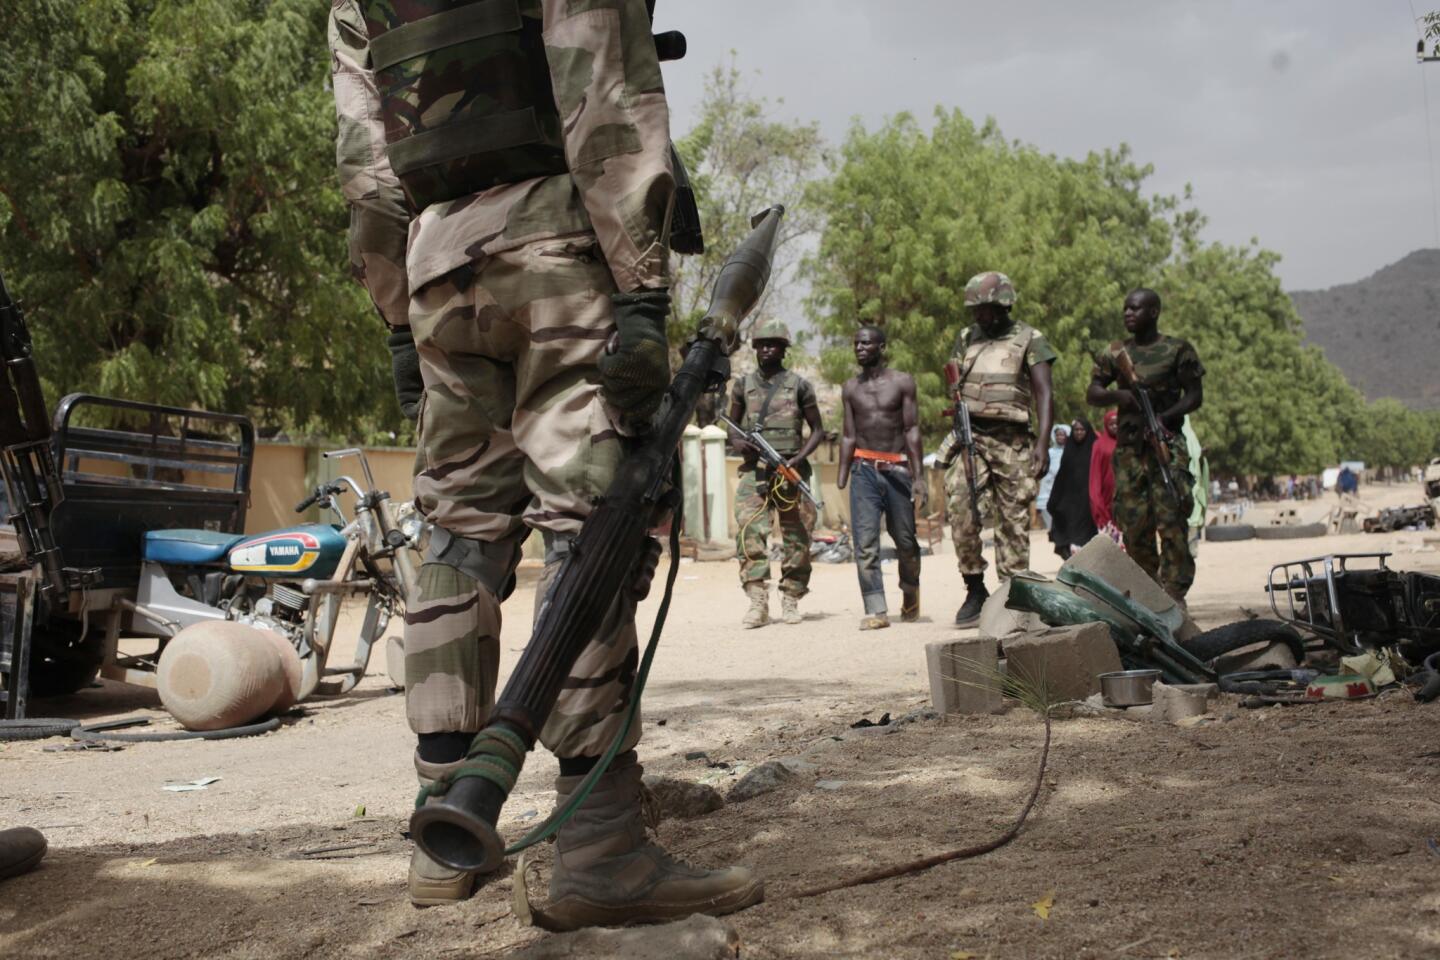 Nigerian soldiers in Gwoza escort Hassan Usman, who had been forced into labor by Boko Haram and had his hand amputated after the Islamic militants accused him of stealing fuel.